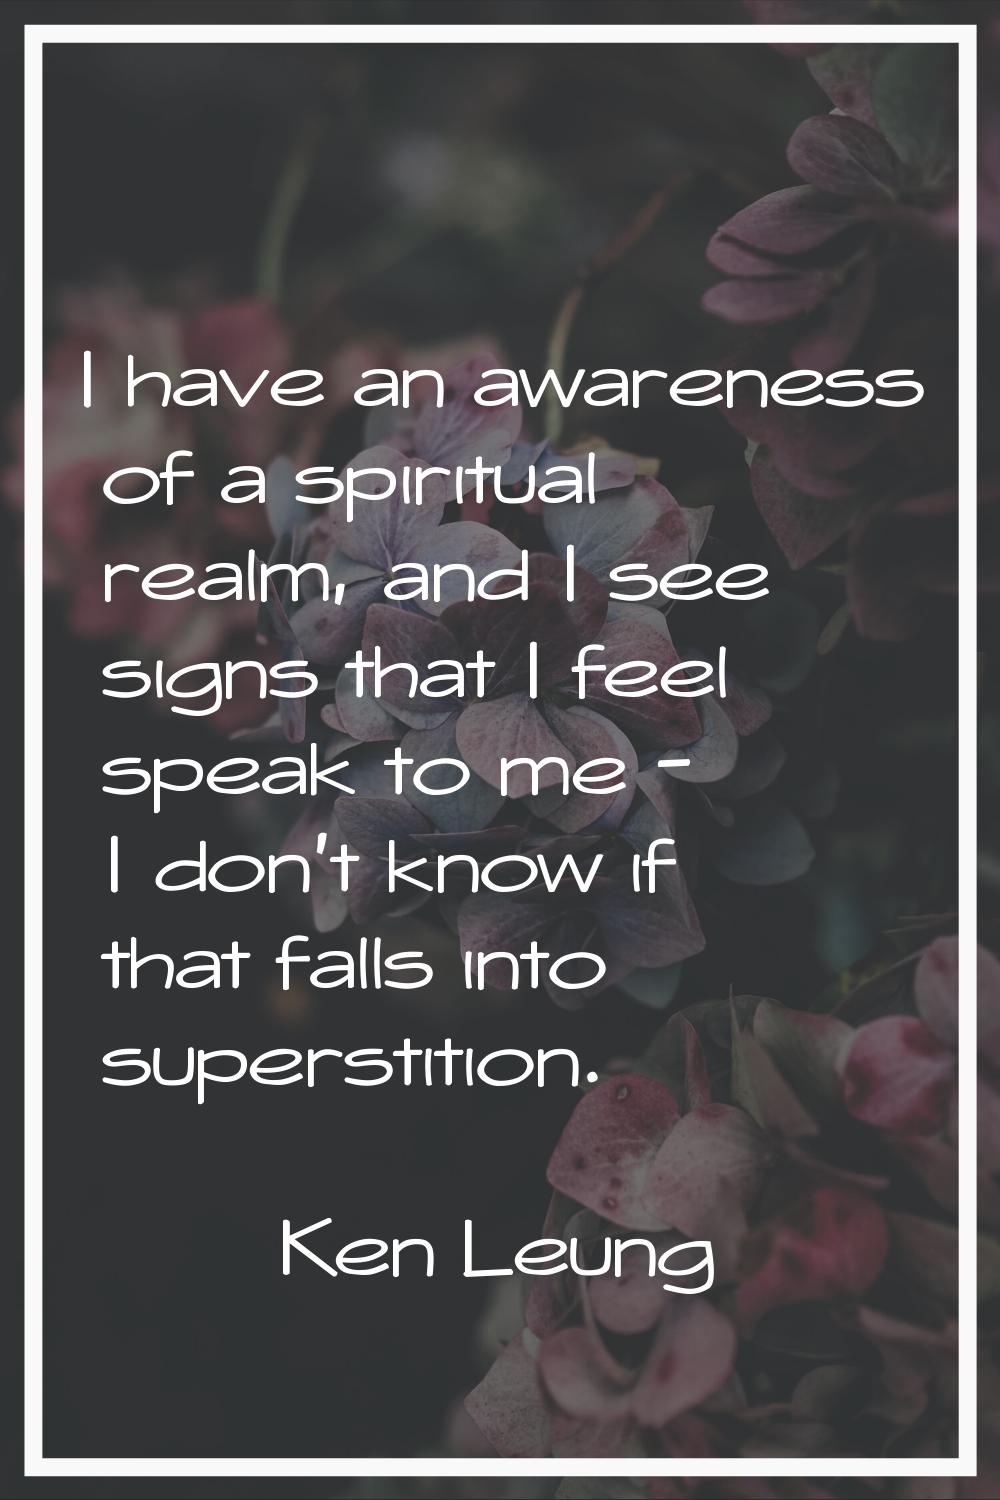 I have an awareness of a spiritual realm, and I see signs that I feel speak to me - I don't know if